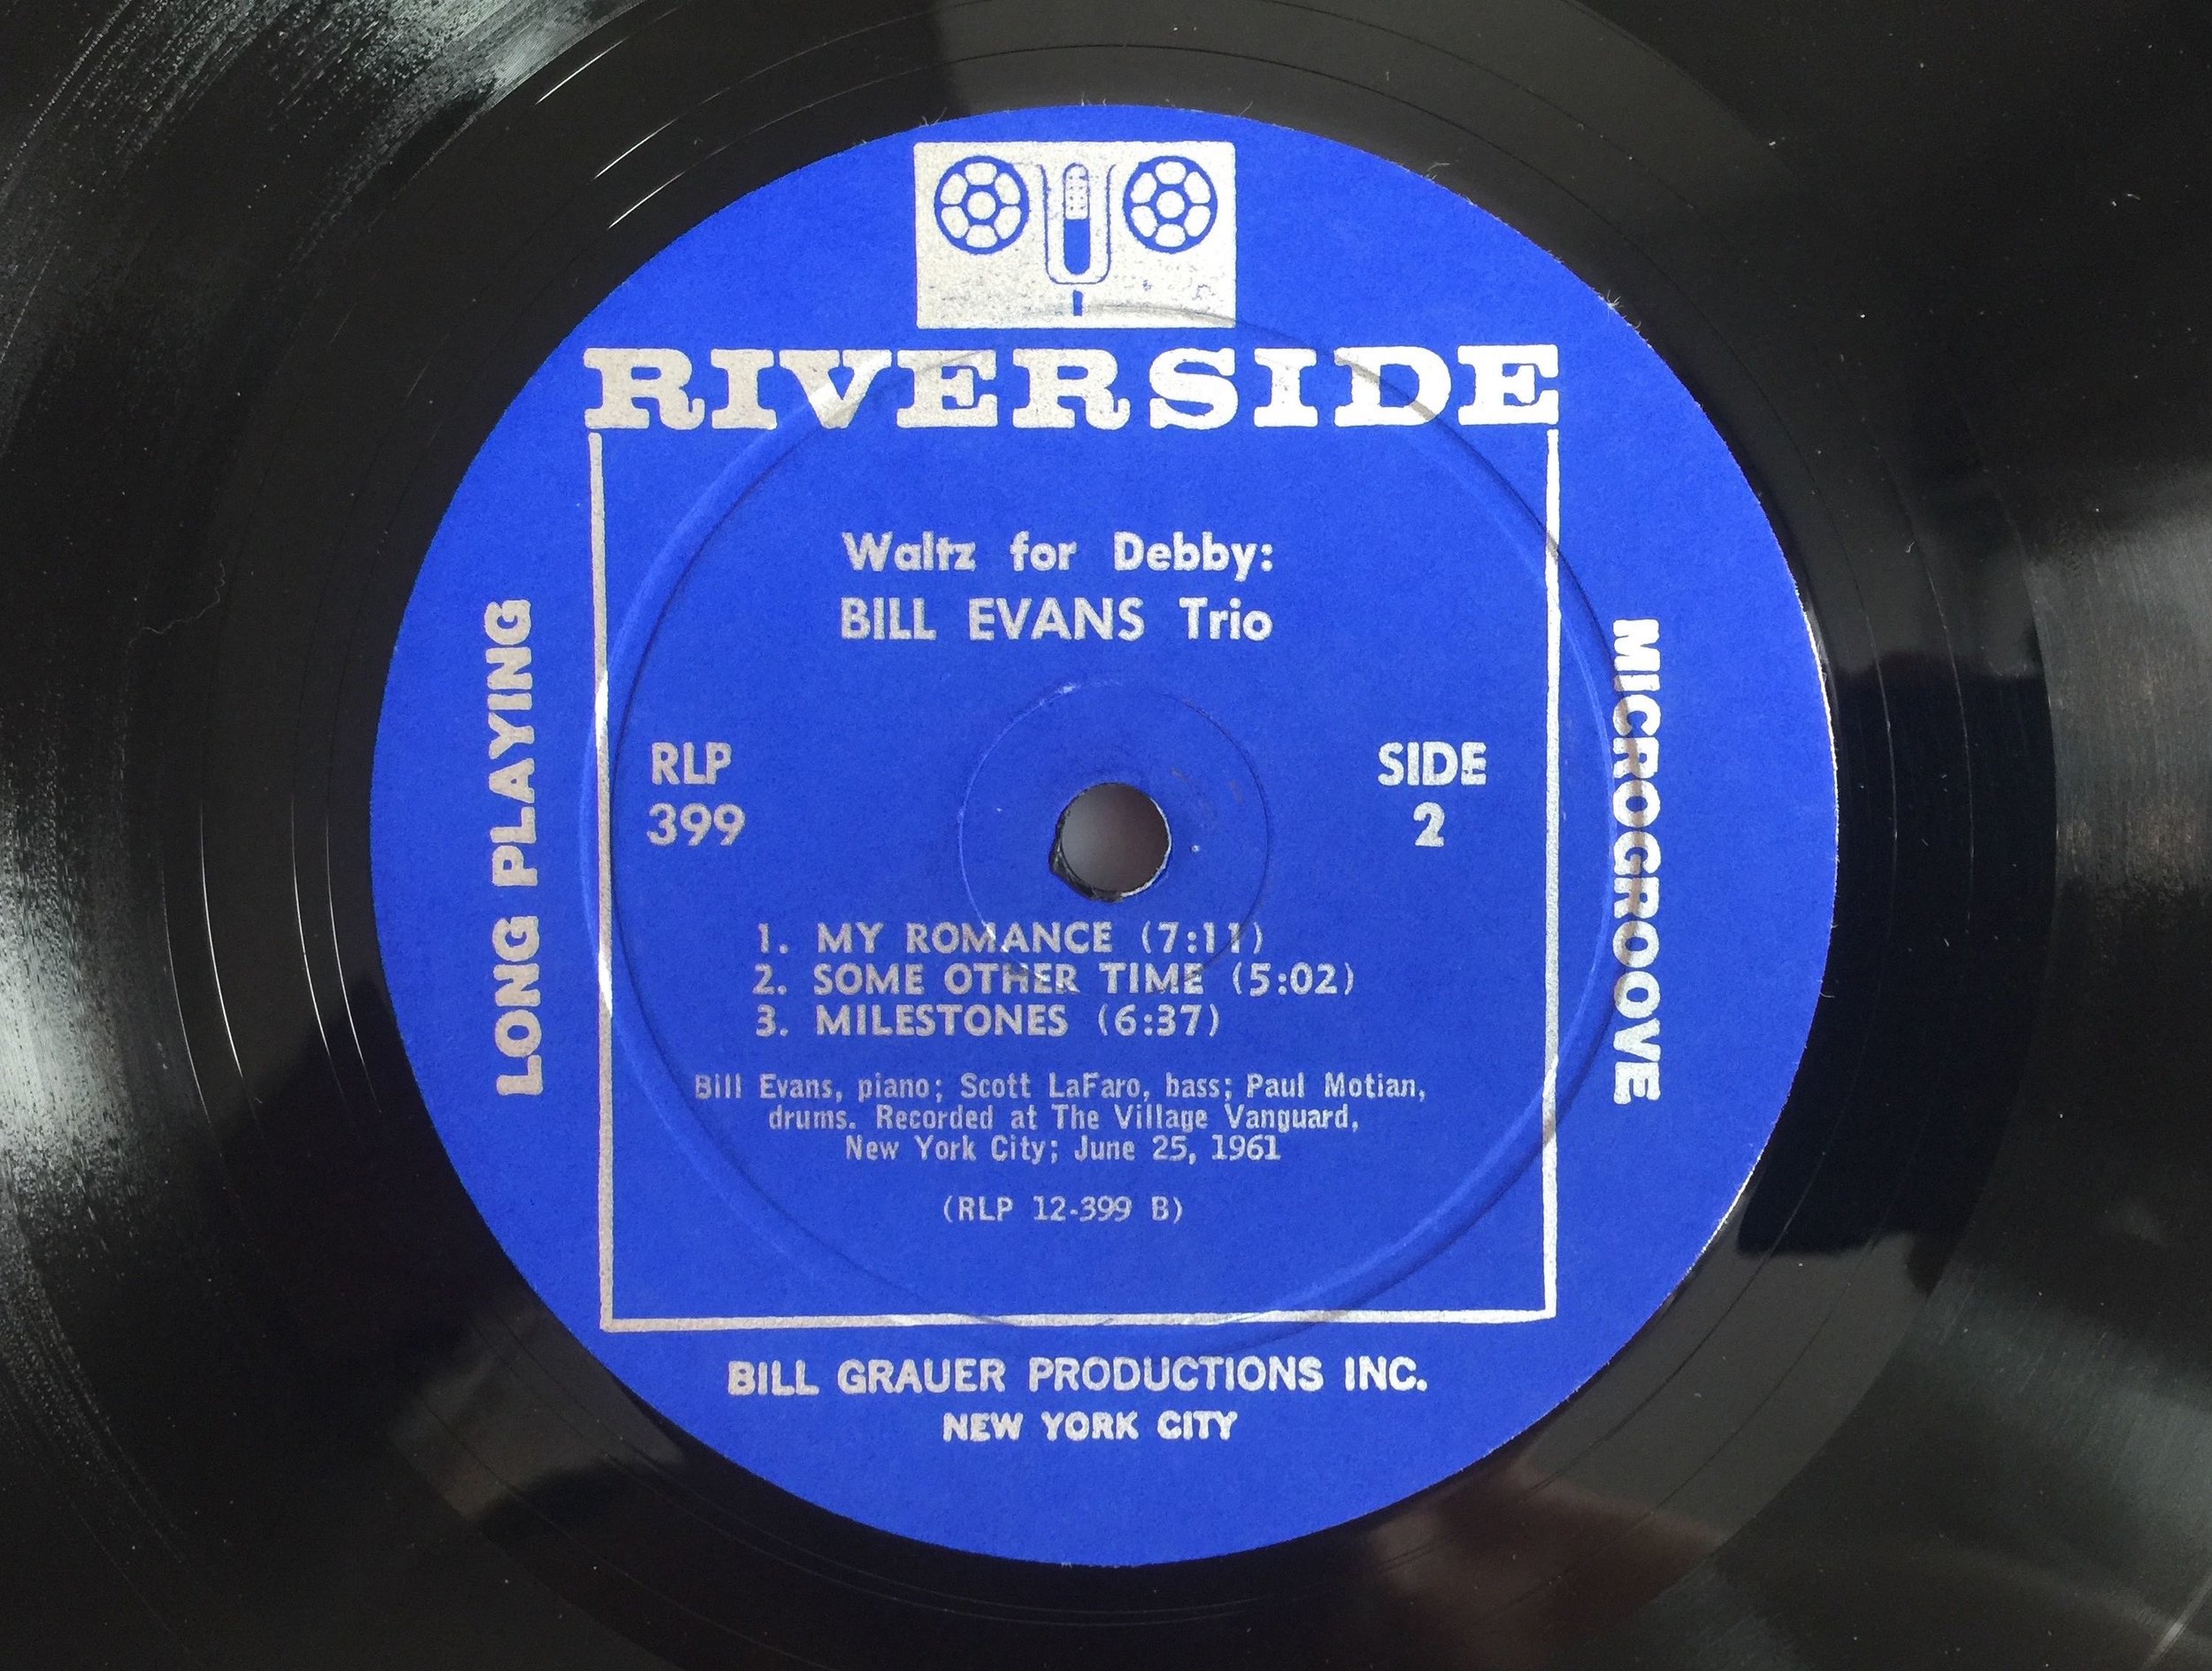 Waltz for Debby by the Bill Evans Trio on Riverside 399 — FW Rare Jazz